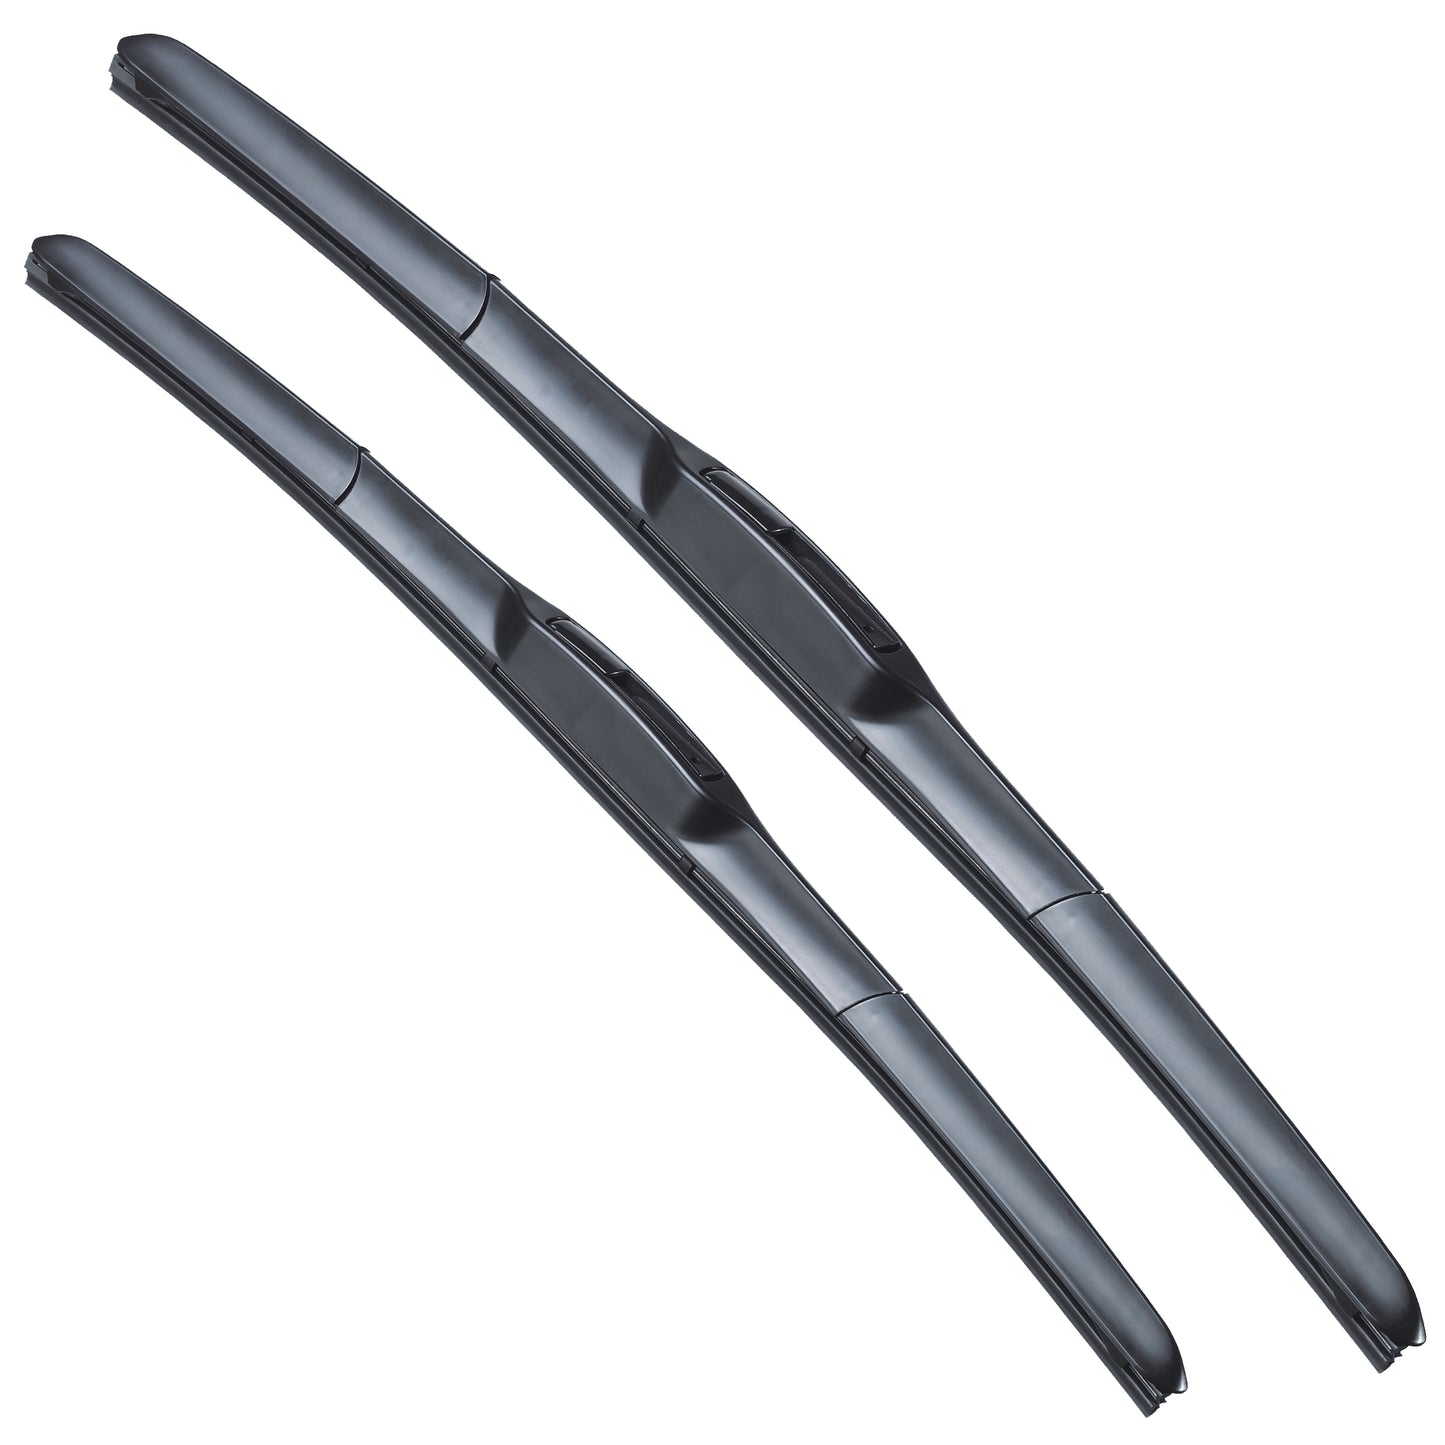 TOYOTA GT 86 Coupe Mar 2012 to Apr 2021 Wiper Blade Kit